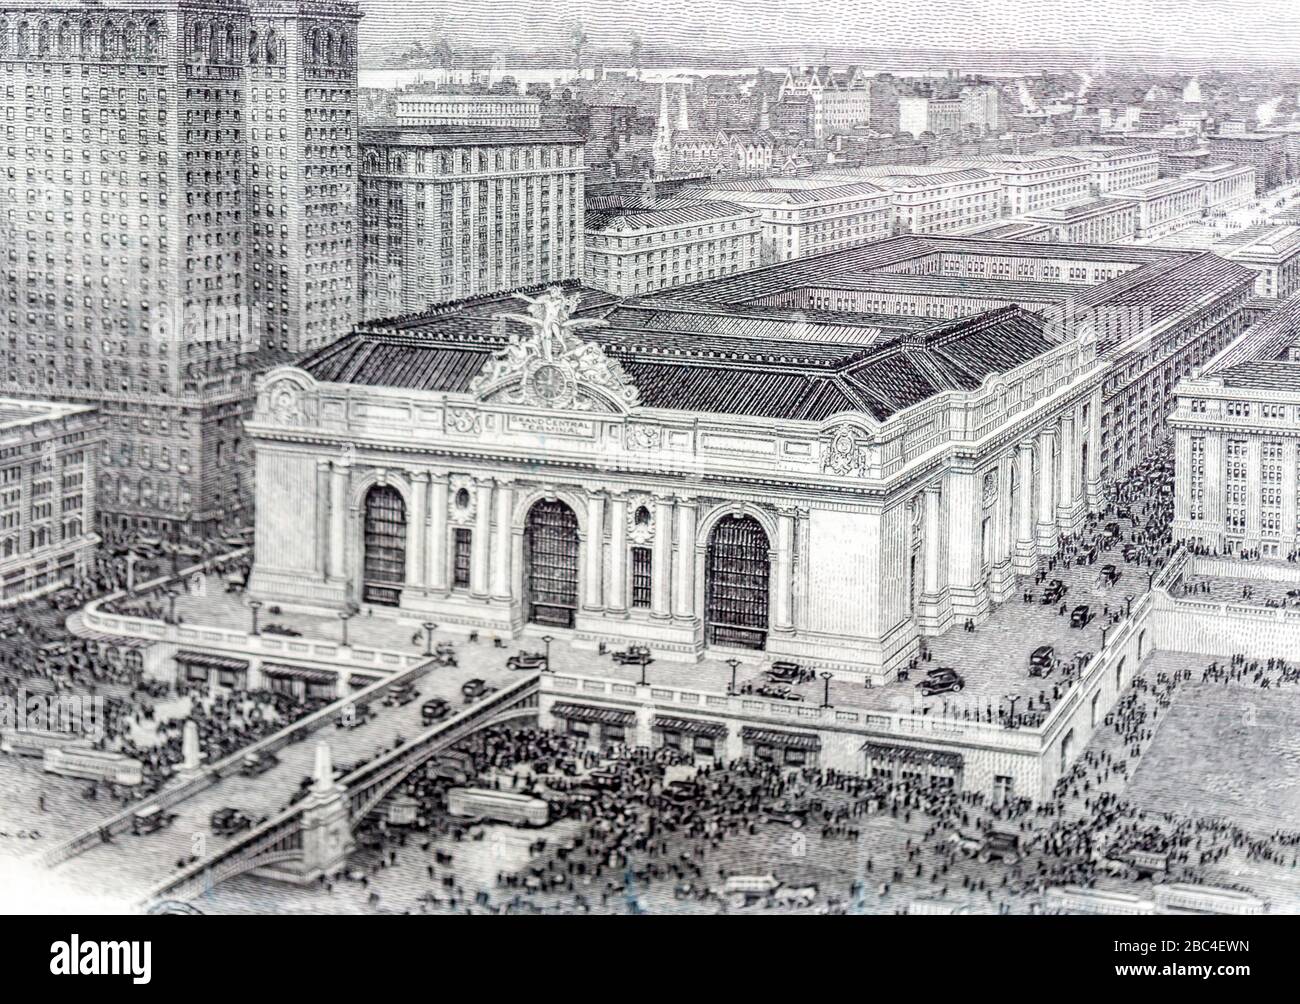 an old vignette of Grand Central Terminal and the surrounding area in New York City Stock Photo